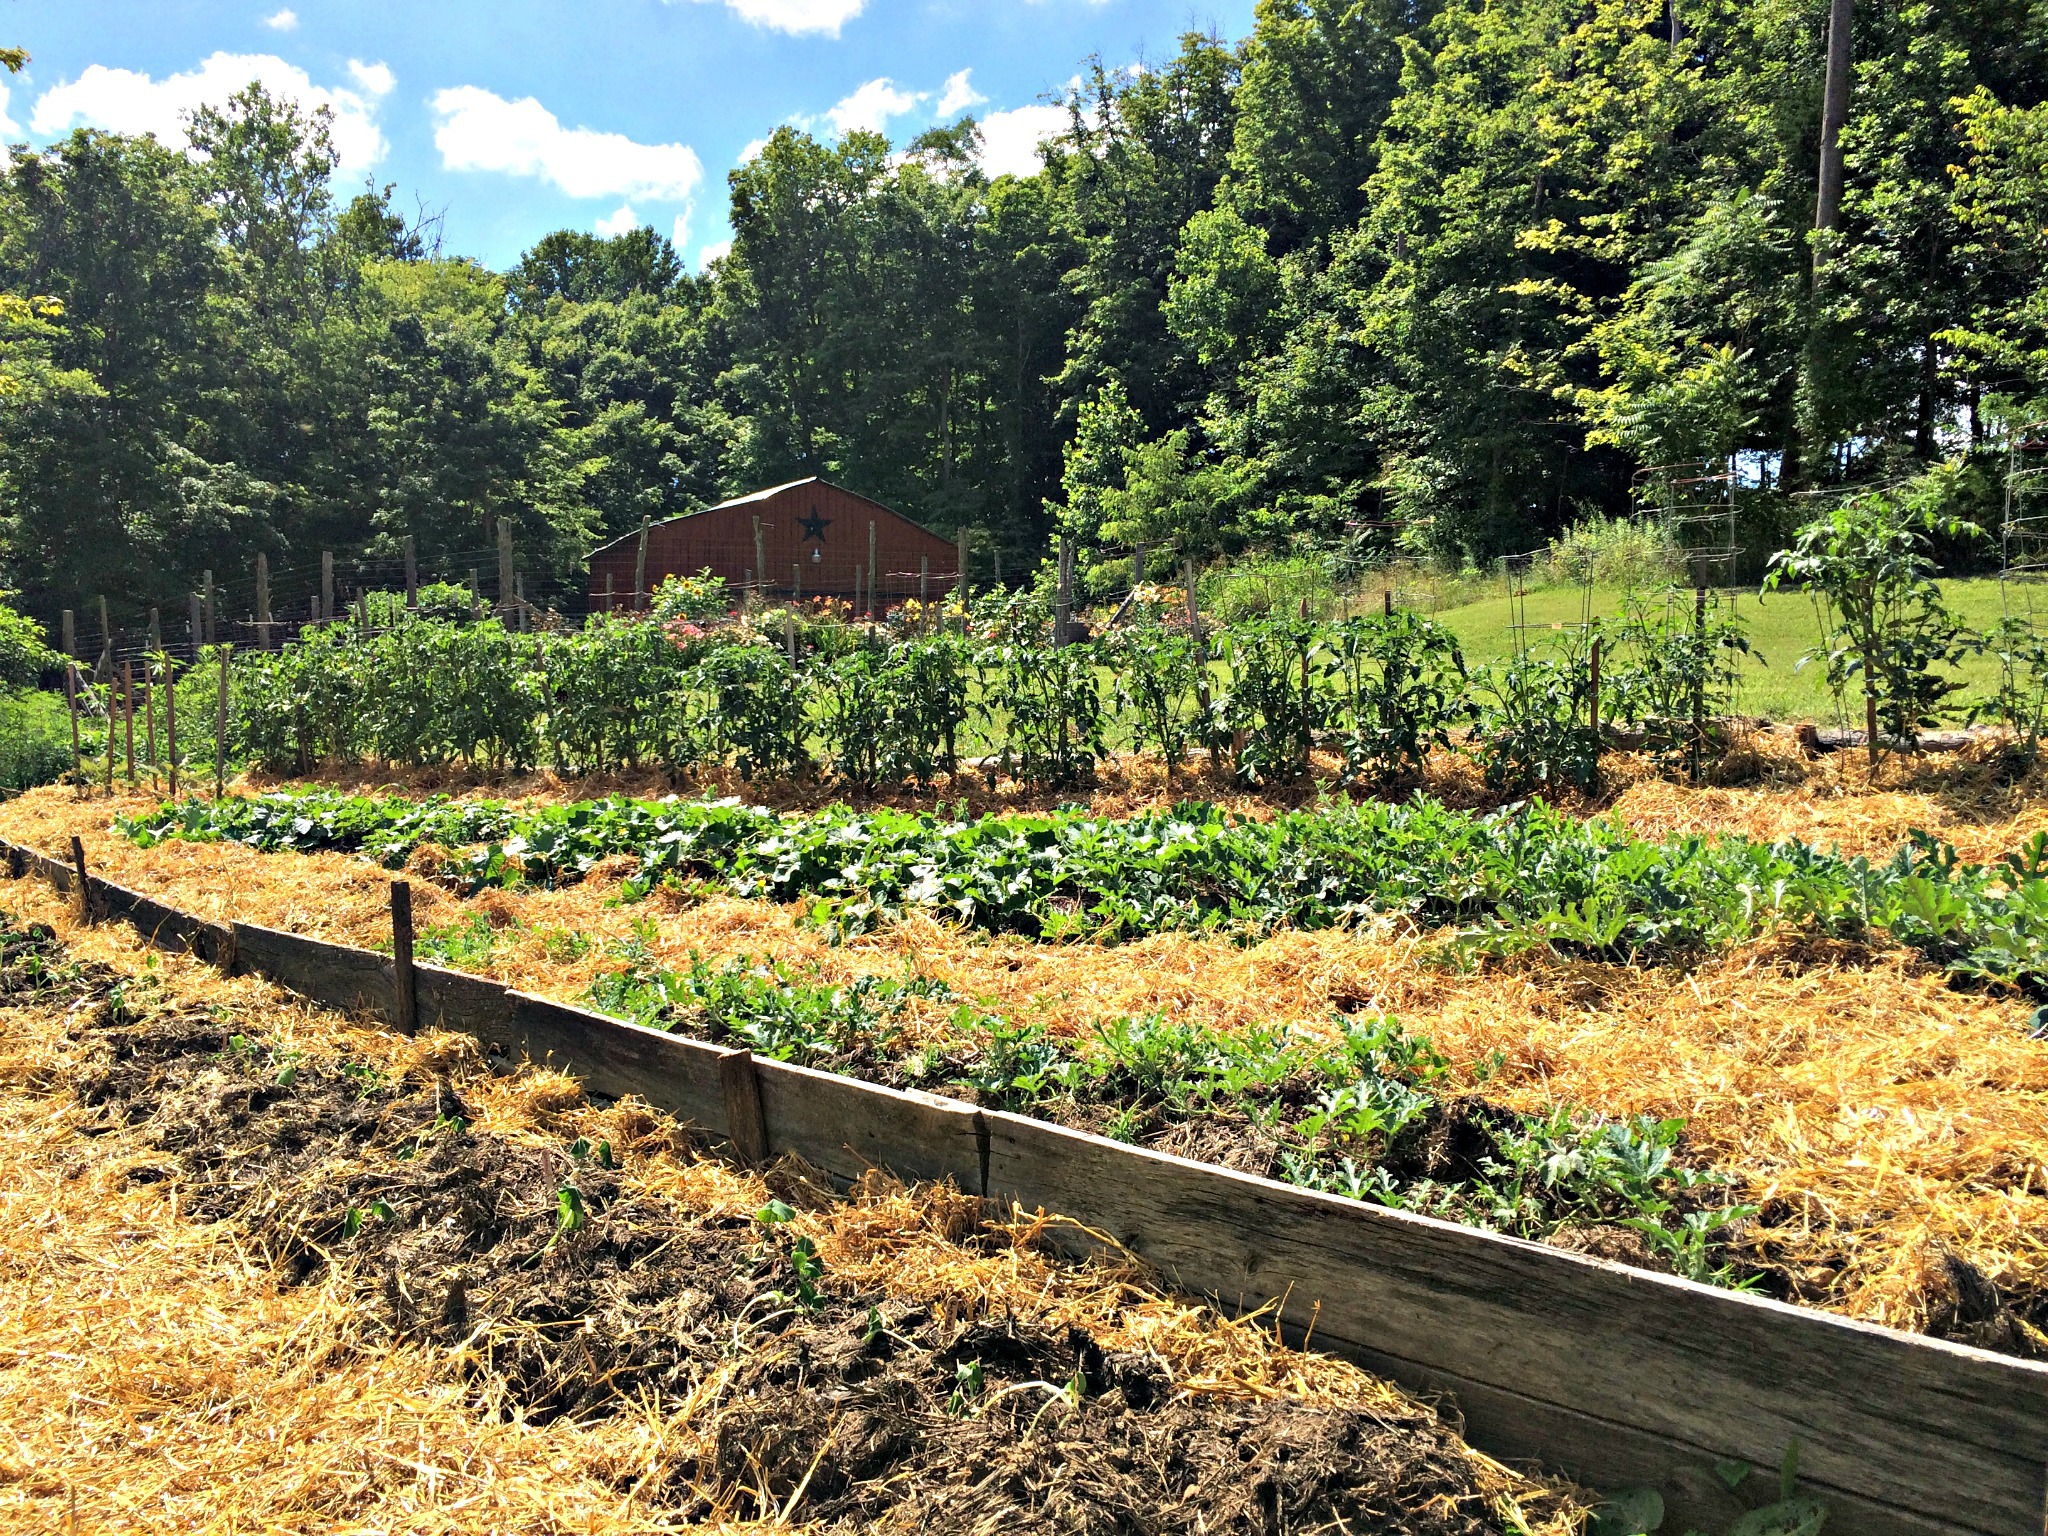 Land Clearing for Gardens: Cultivating Beauty